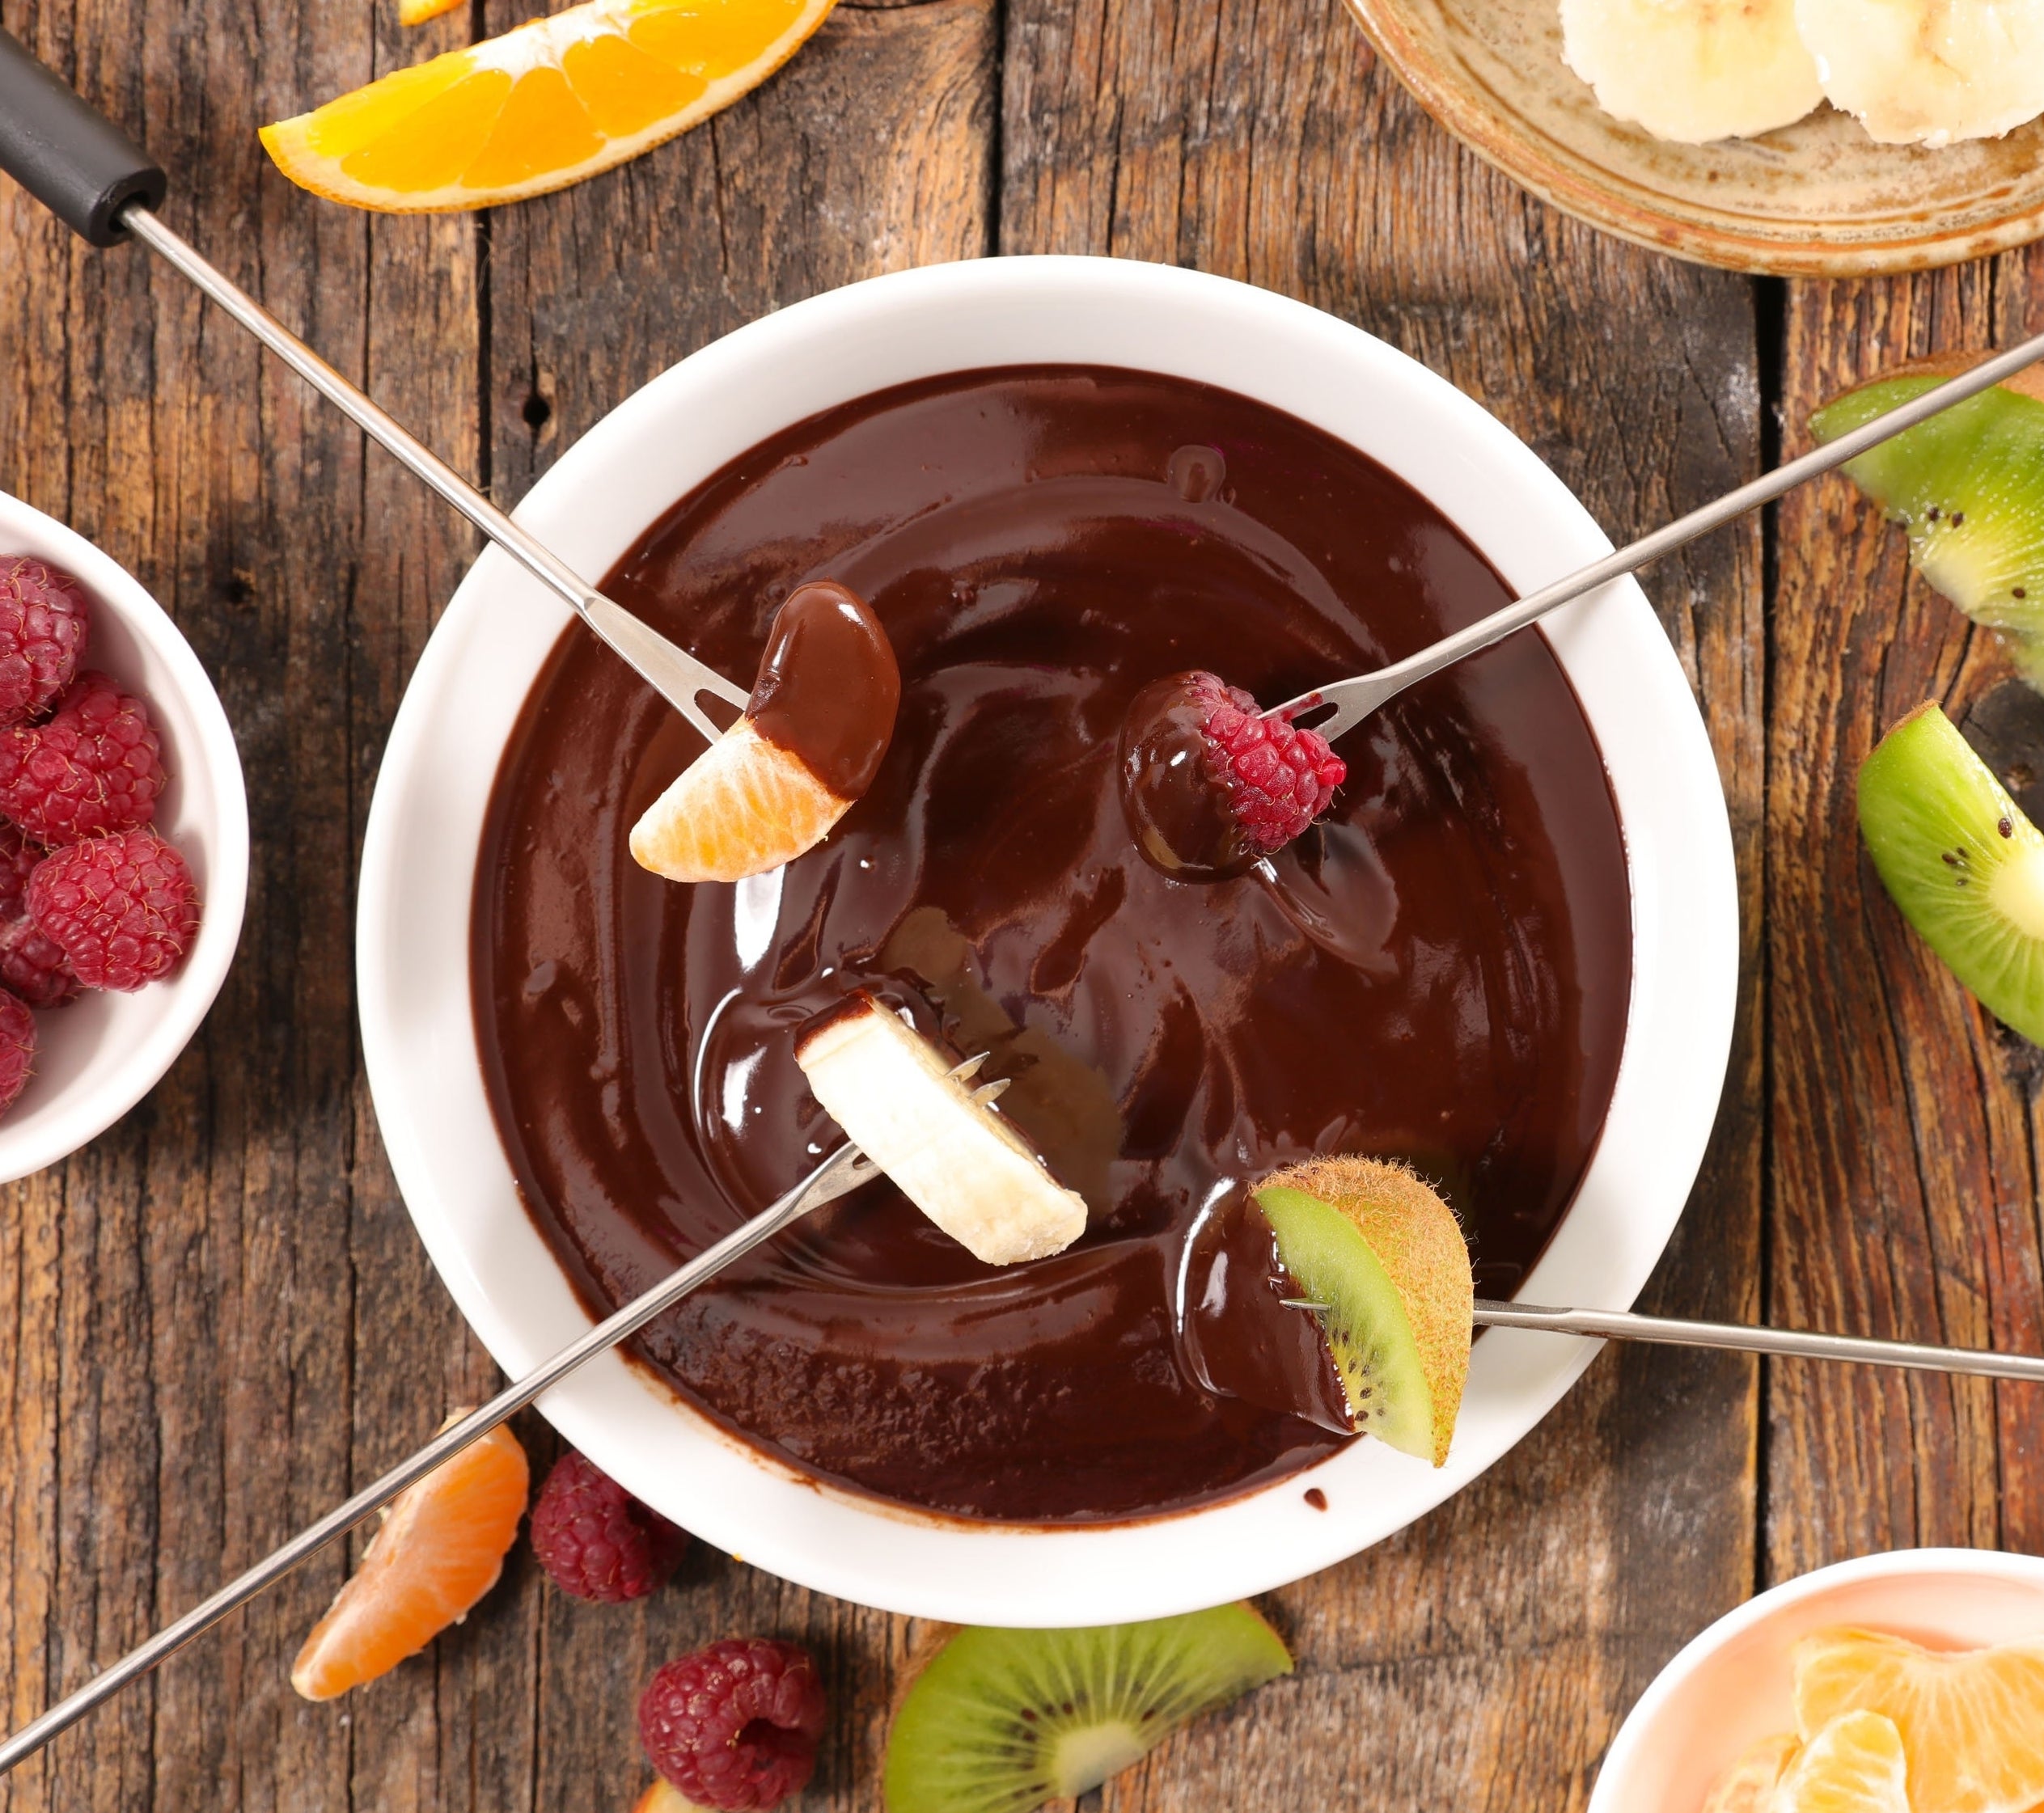 A bowl of chocolate fondue with fruits like banana, kiwi, and raspberry on skewers for dipping